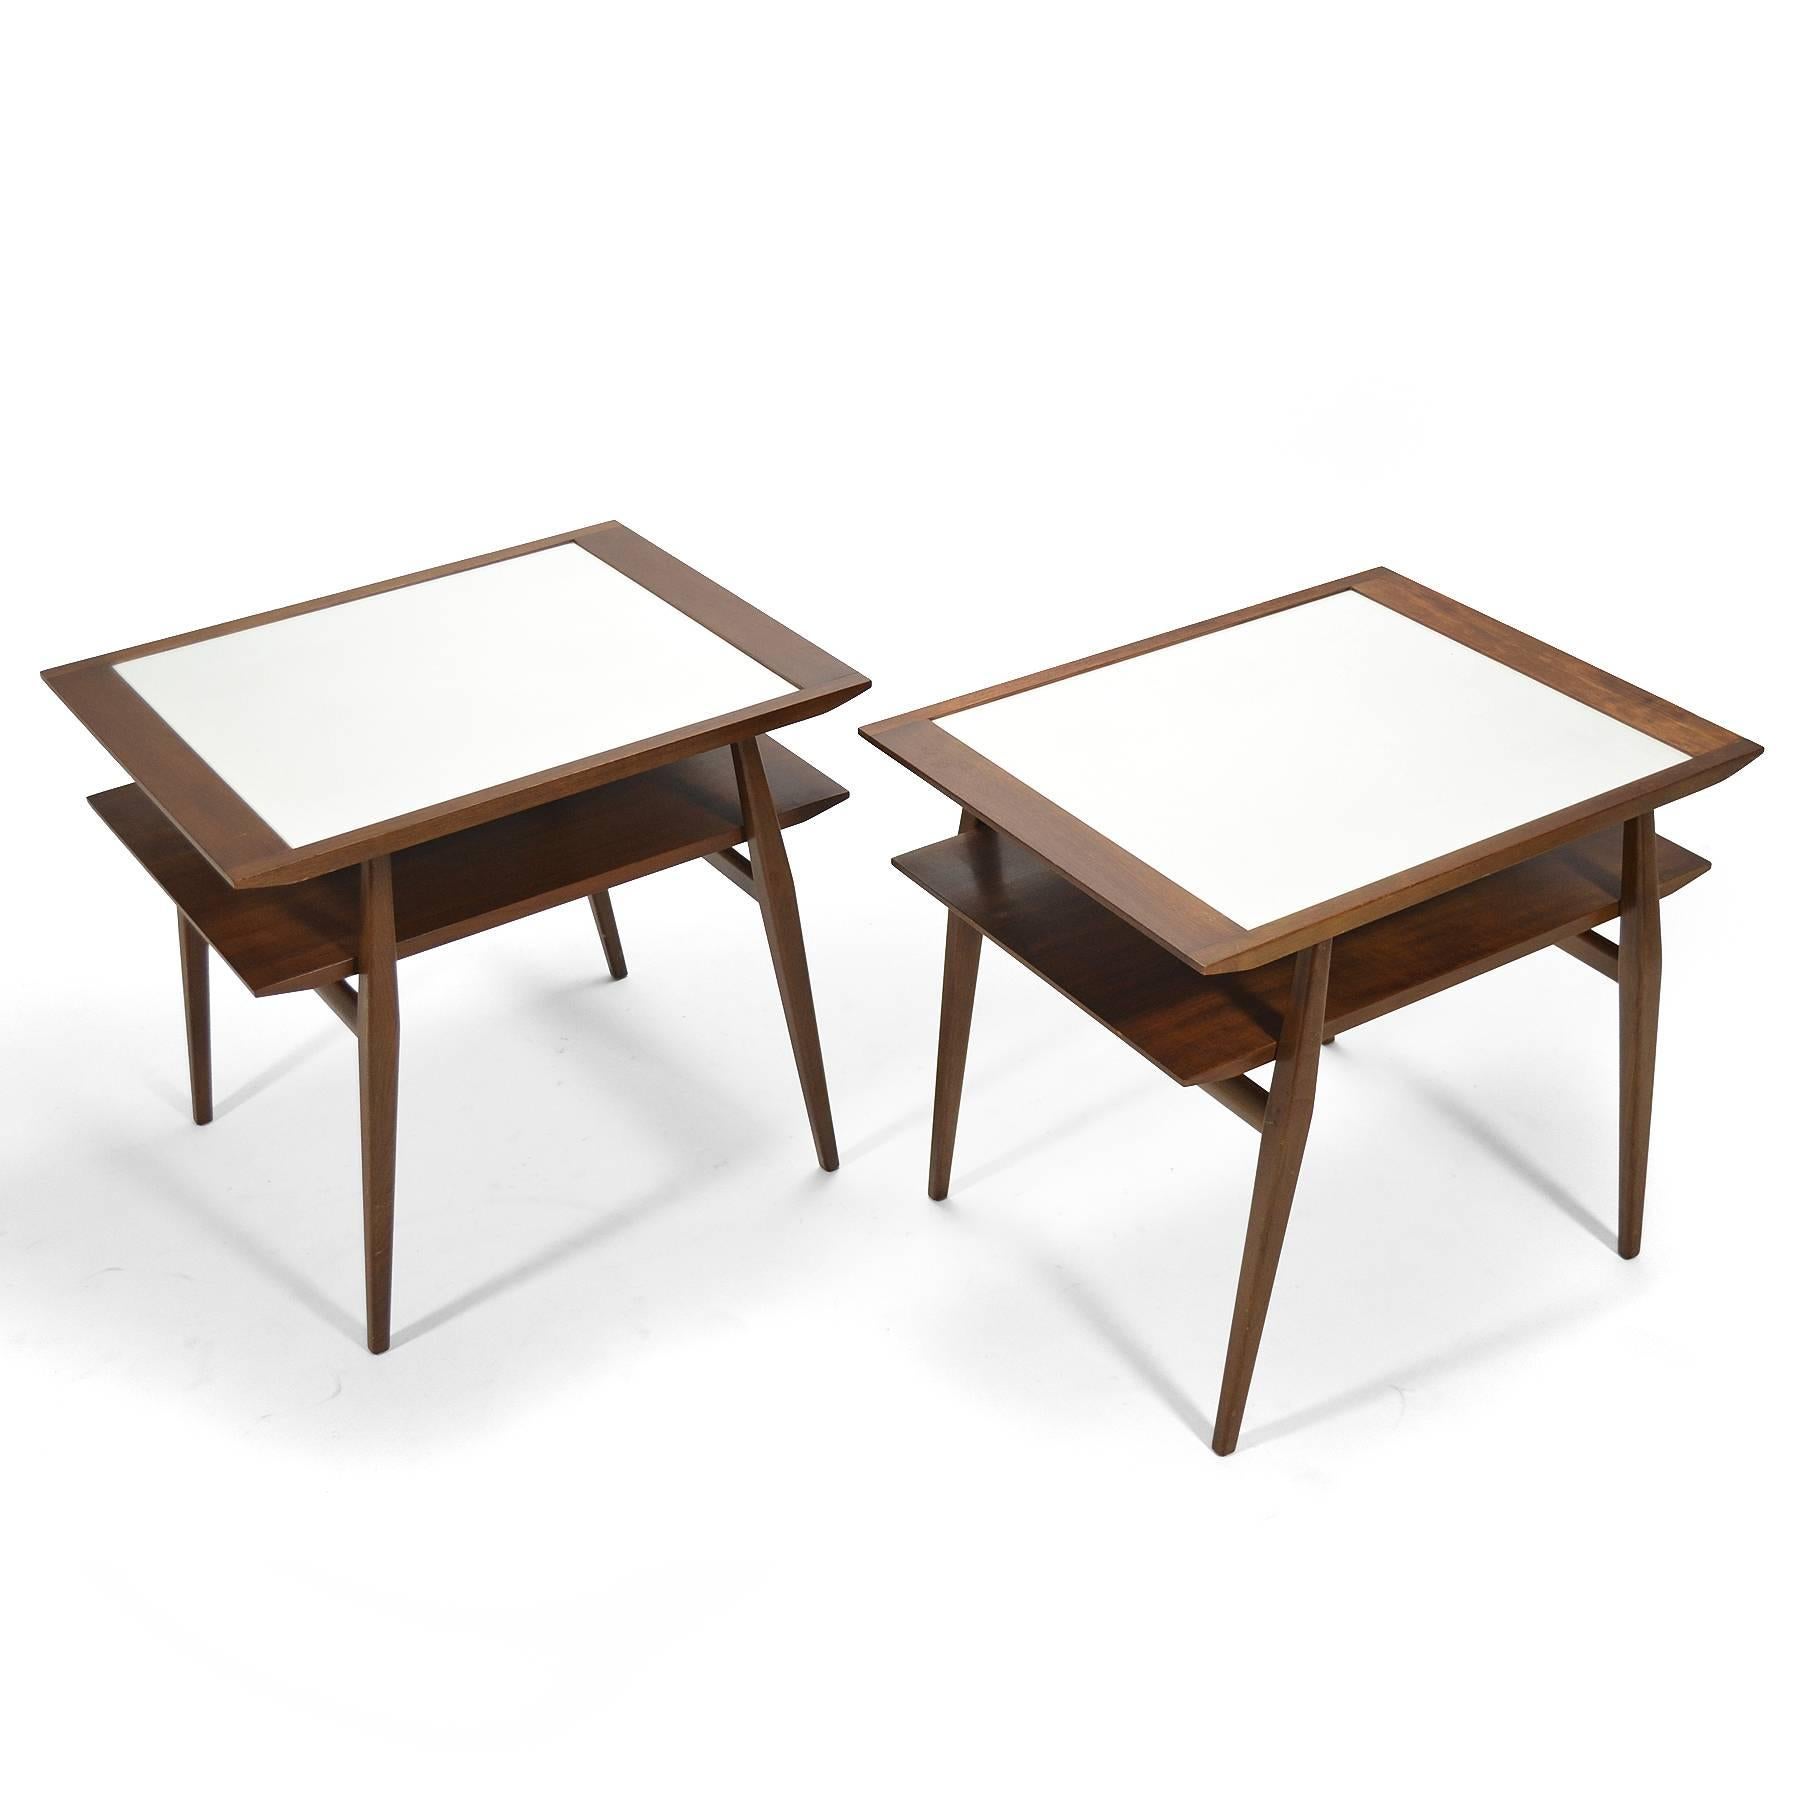 Mid-Century Modern Bertha Schaefer Pair of End Tables by Singer & Sons For Sale